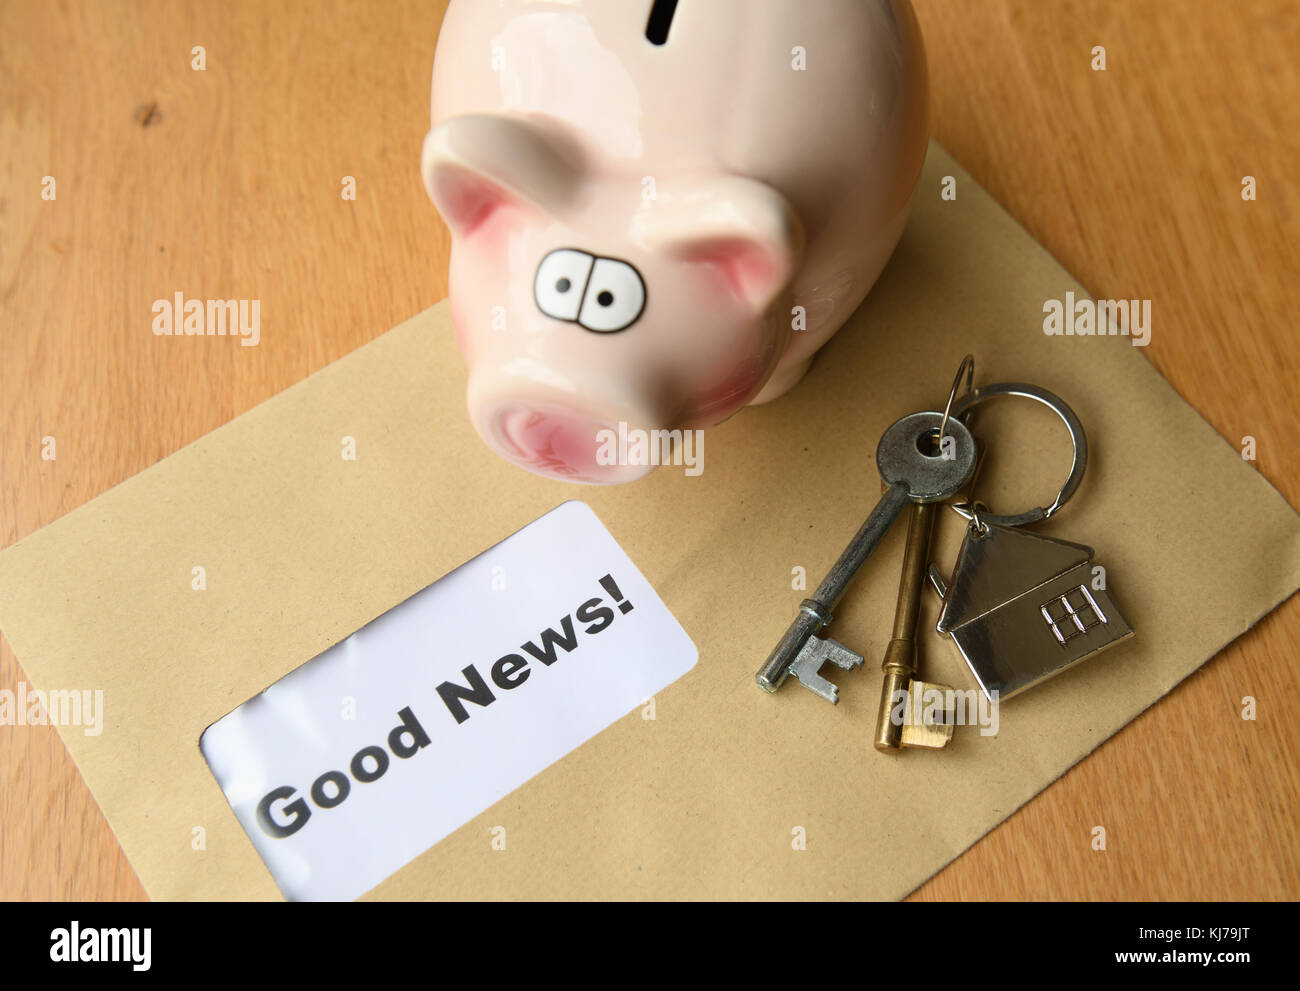 Concept of good news with piggy bank house keys and an envelope with good news inside Stock Photo